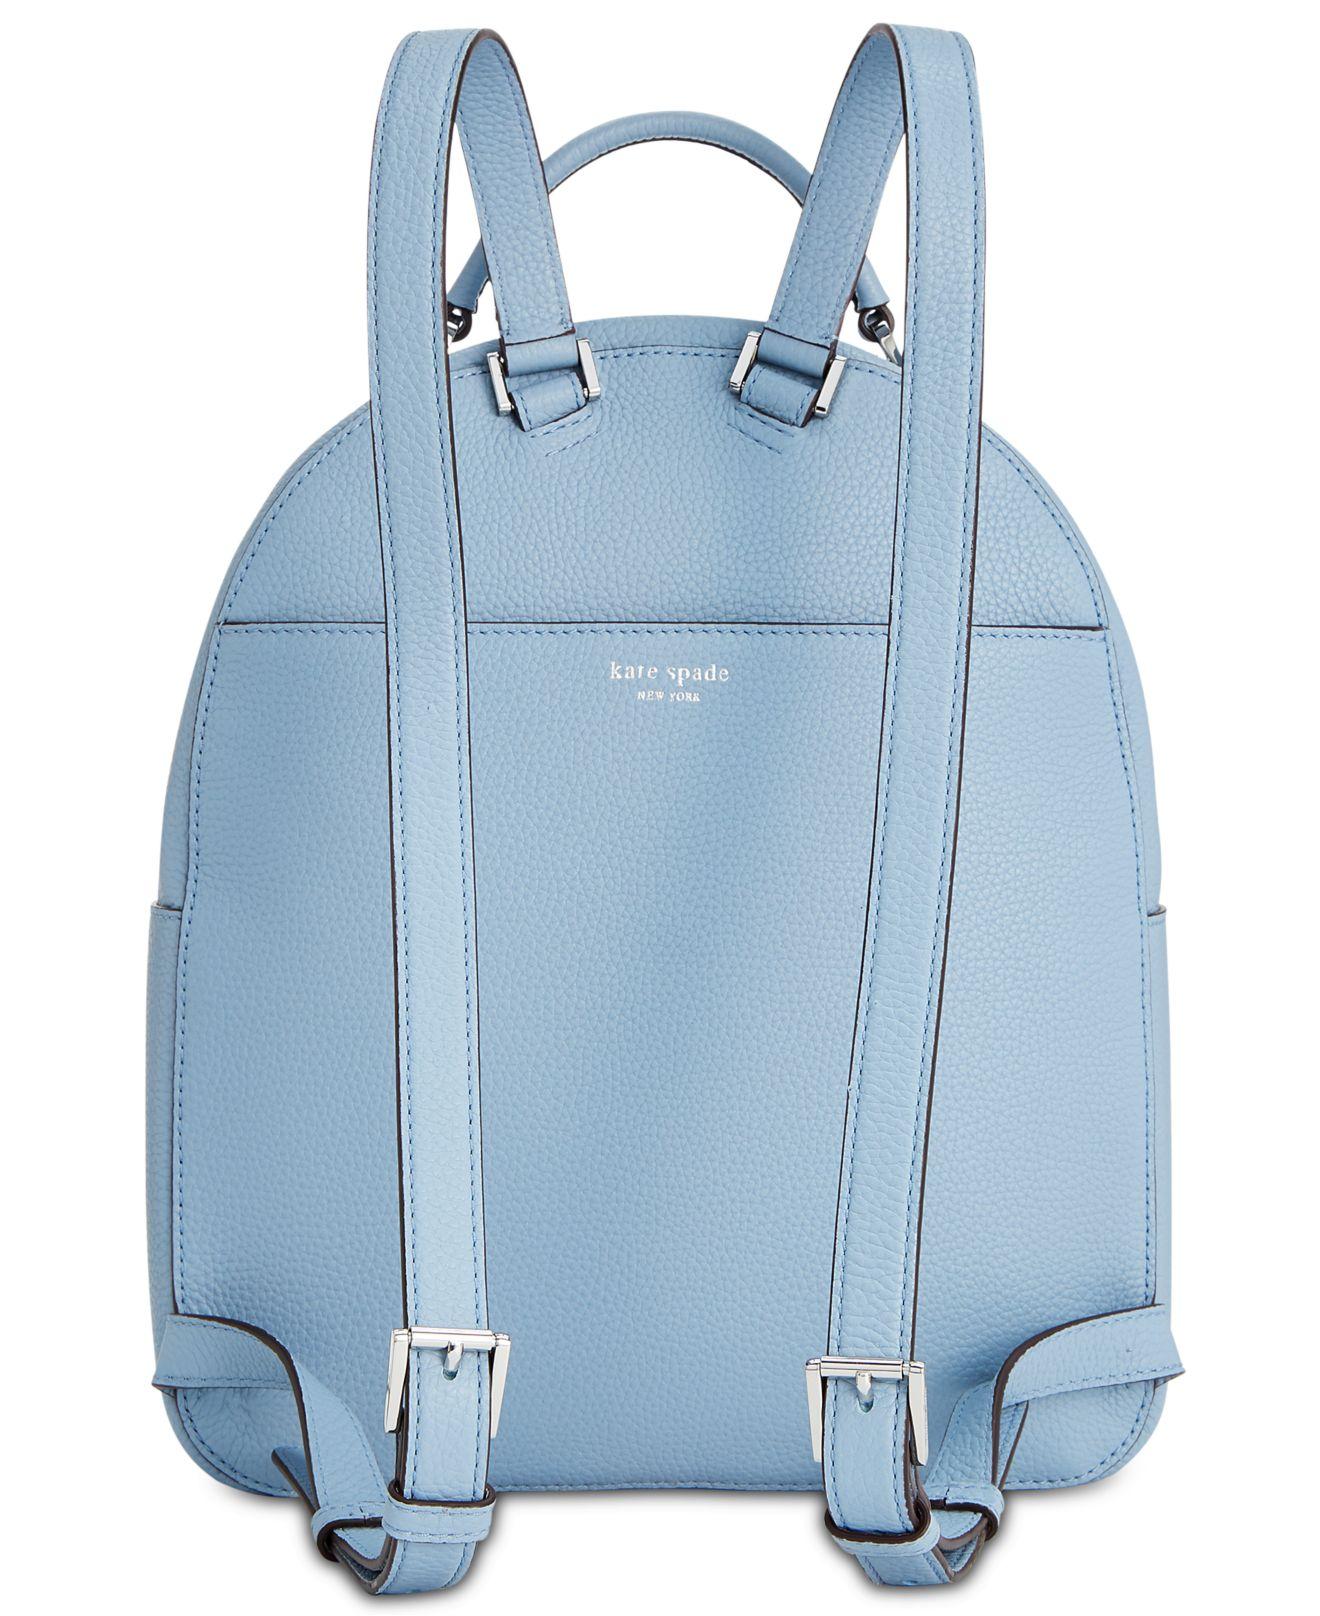 Kate Spade Polly Pebble Leather Backpack in Blue Lyst